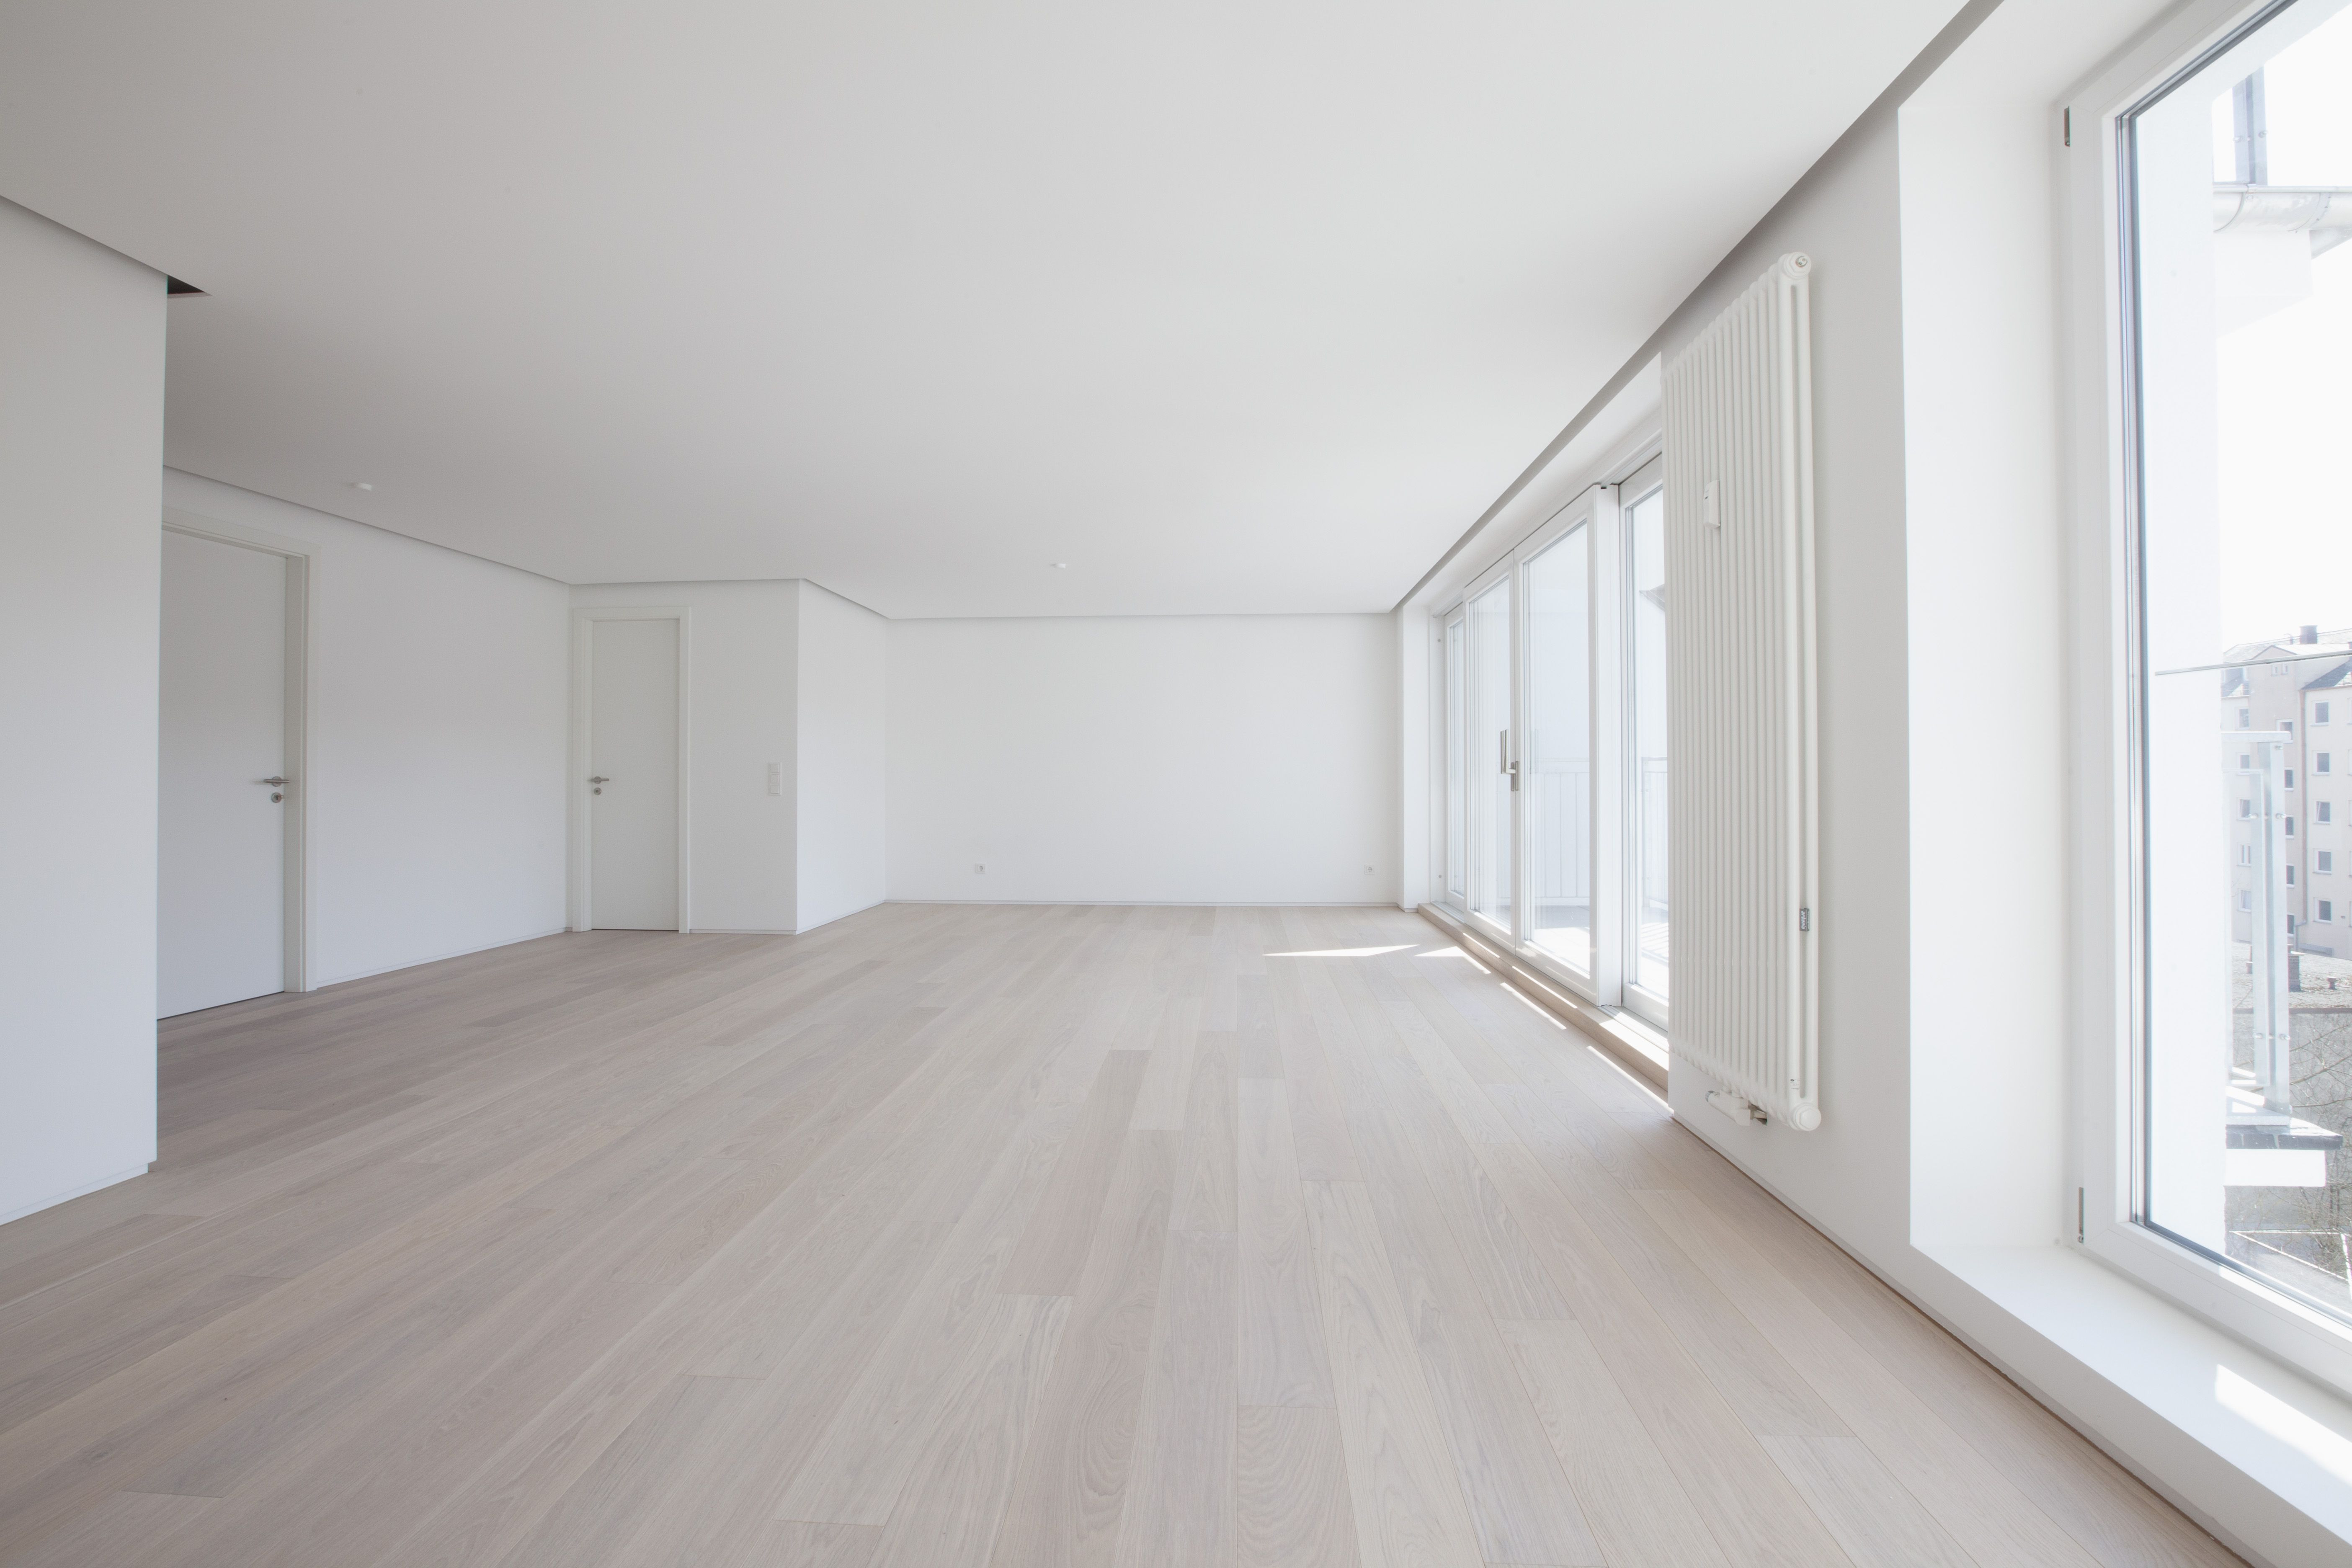 30 attractive Bruce Hardwood Floors Logo 2024 free download bruce hardwood floors logo of basics of favorite hybrid engineered wood floors within empty living room in modern apartment 578189139 58866f903df78c2ccdecab05